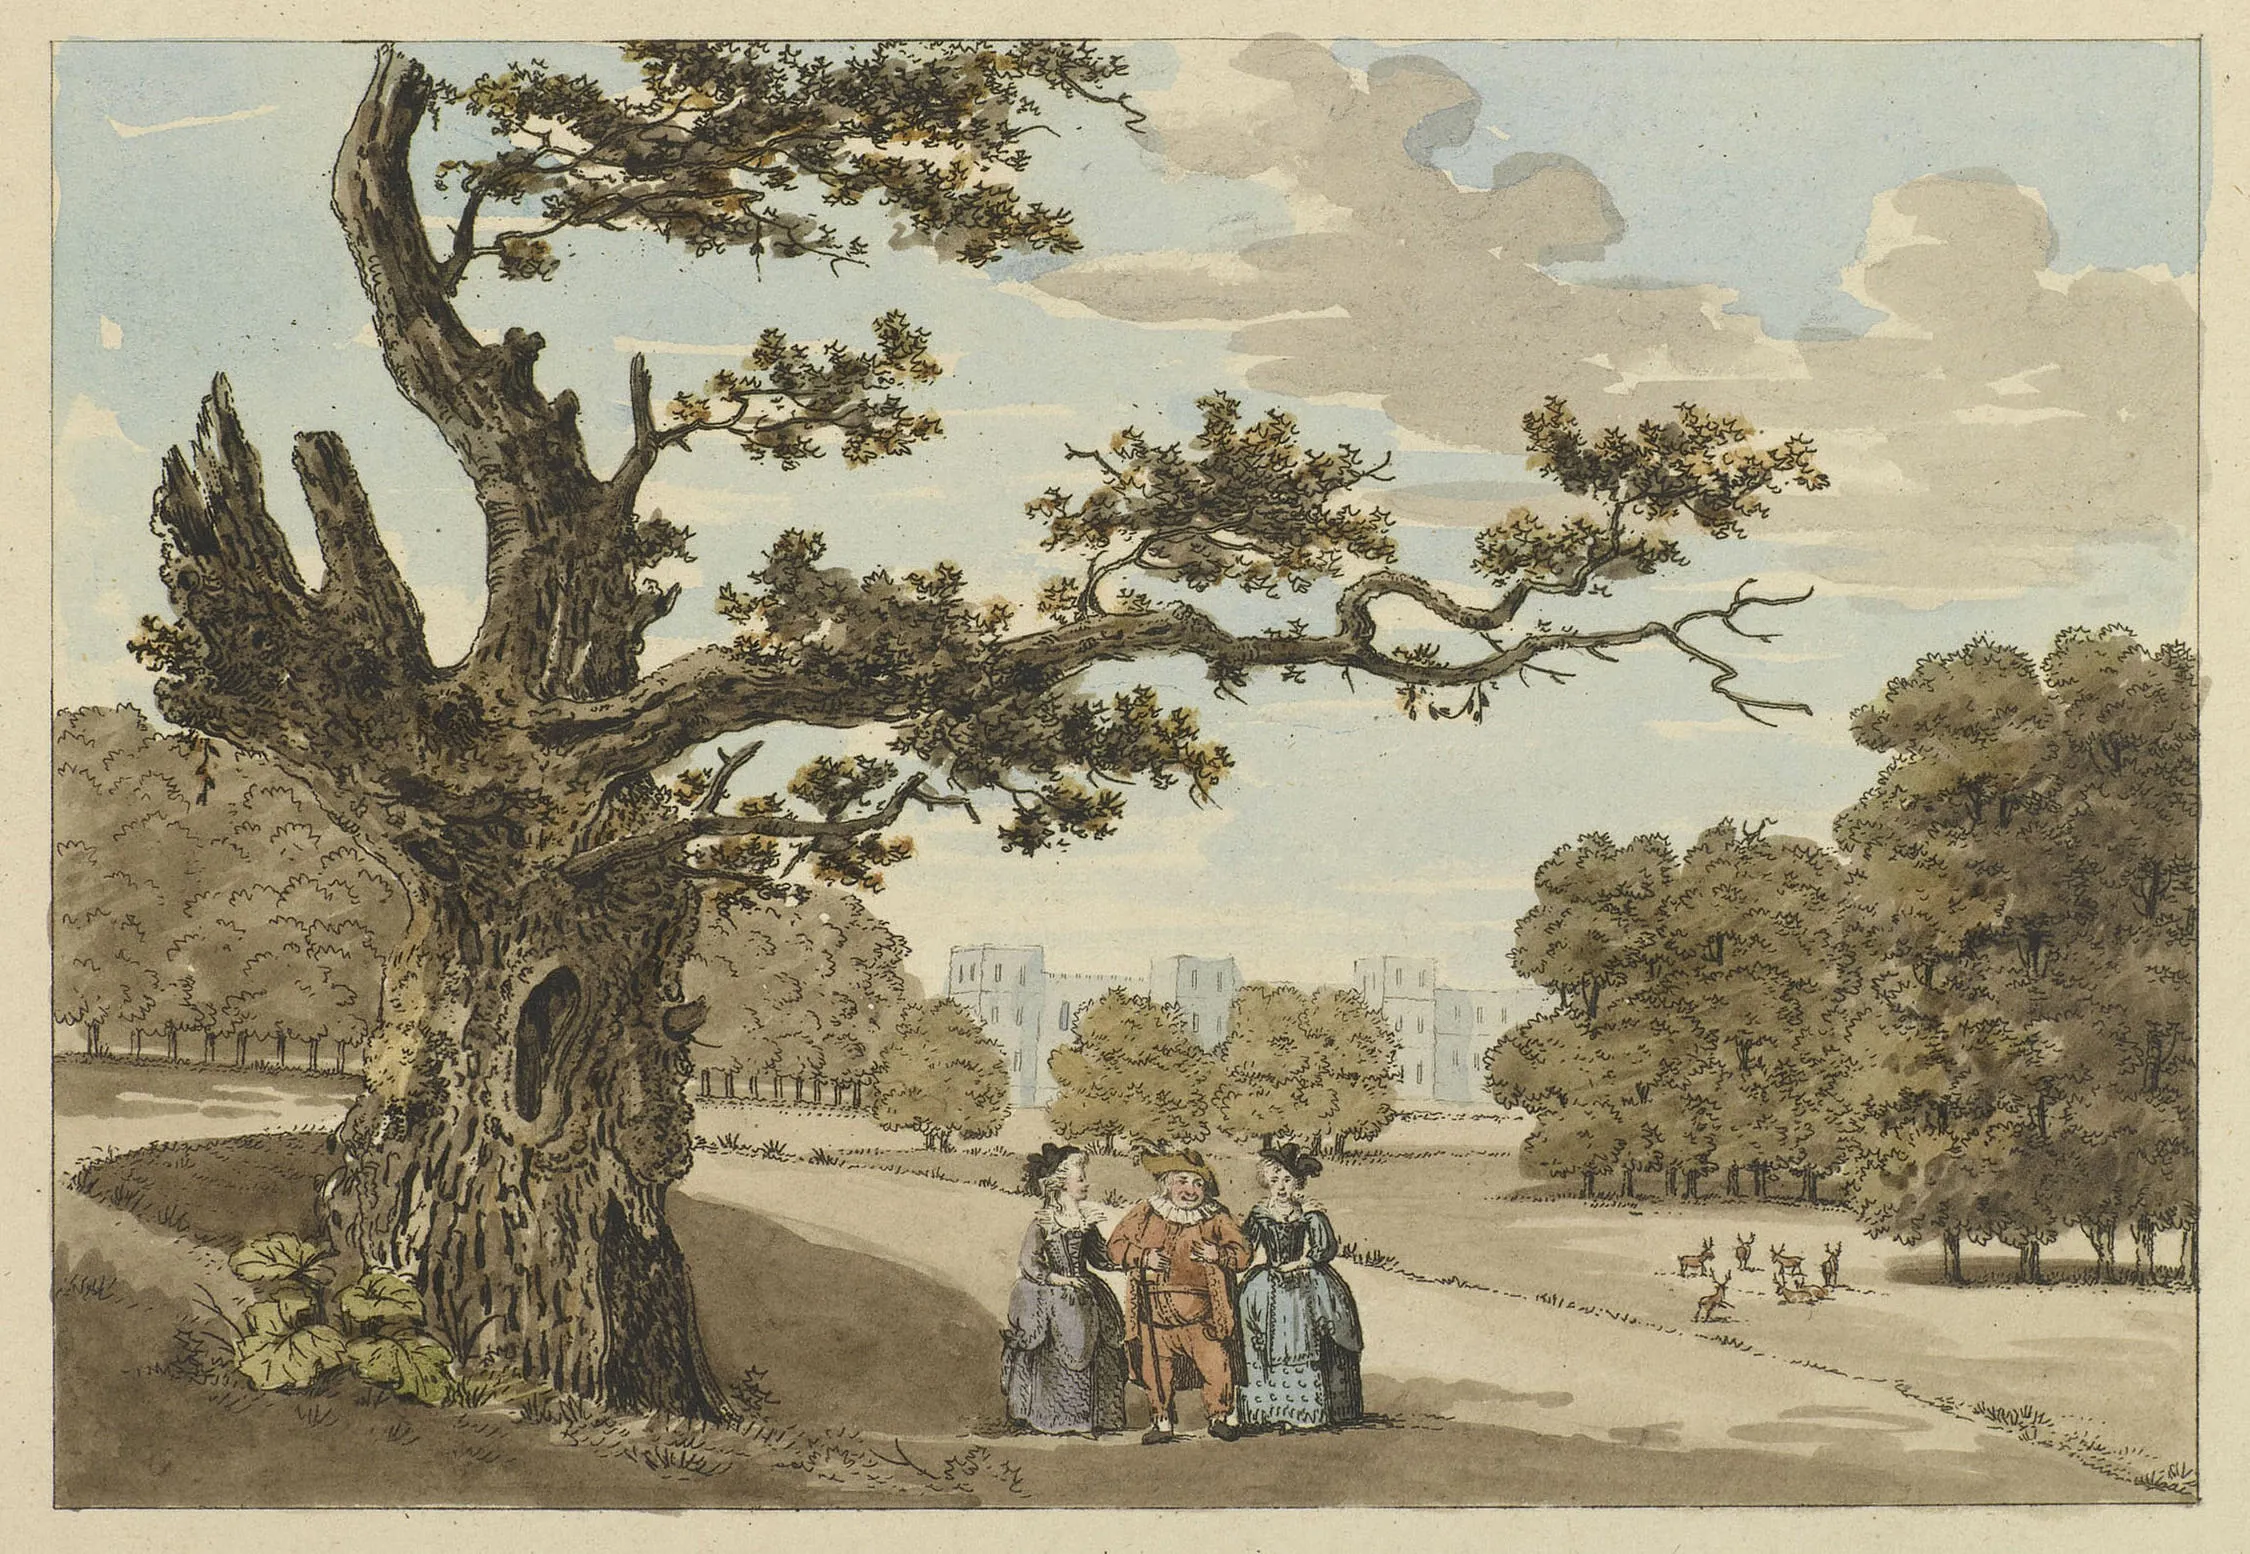 Herne's Oak, Windsor Park c. 1799. Etching with hand colouring. Source: Royal Collection Trust.